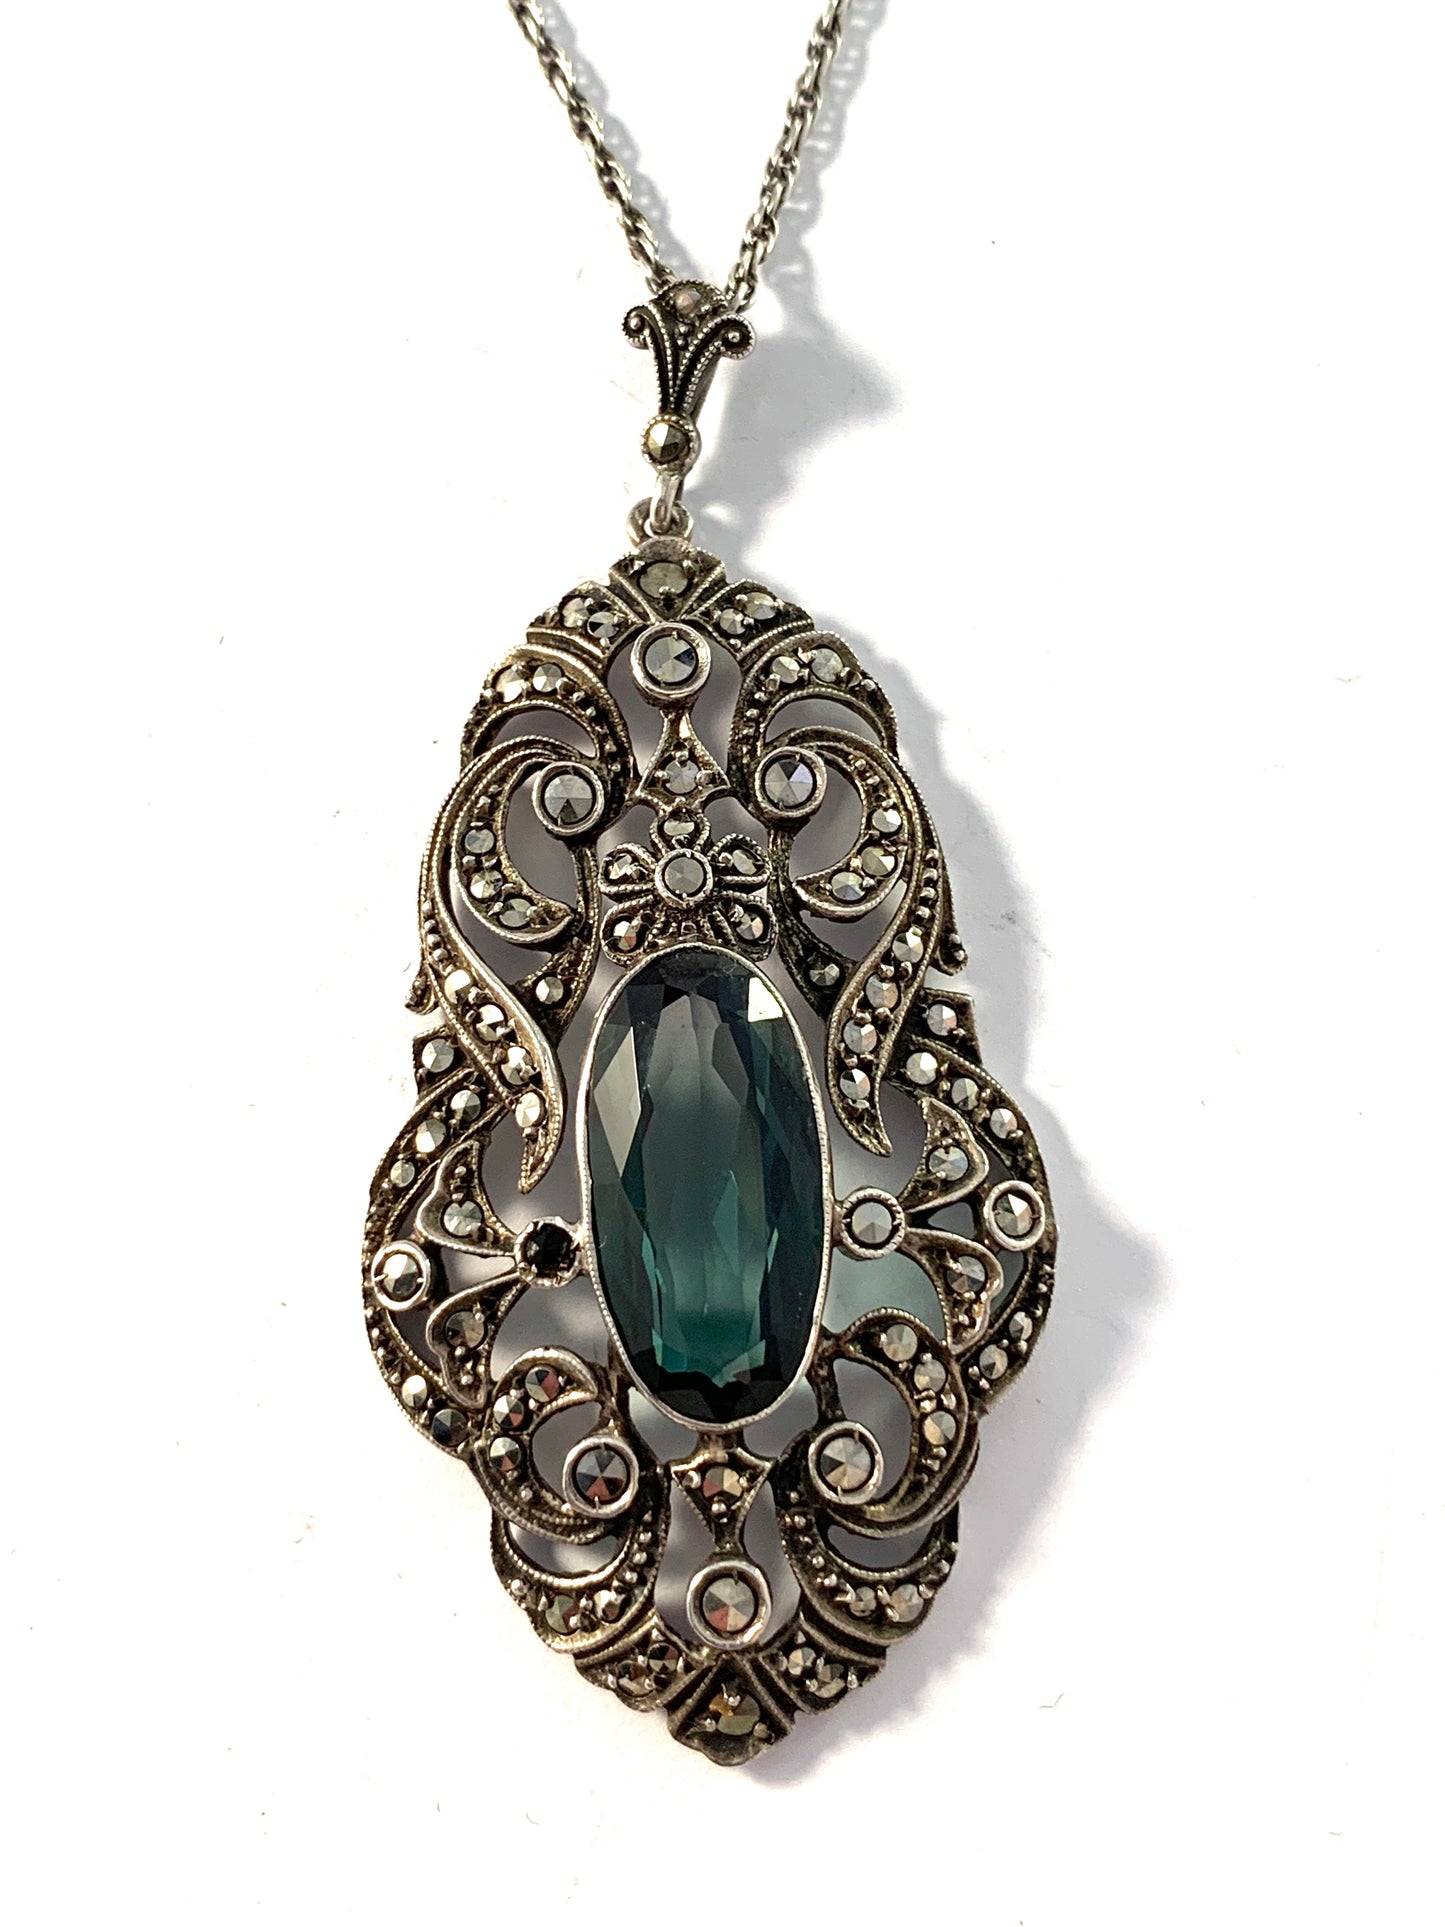 Germany / Austria early 1900s Solid Silver Marcasite Dark Forest Green Paste Large Pendant Necklace